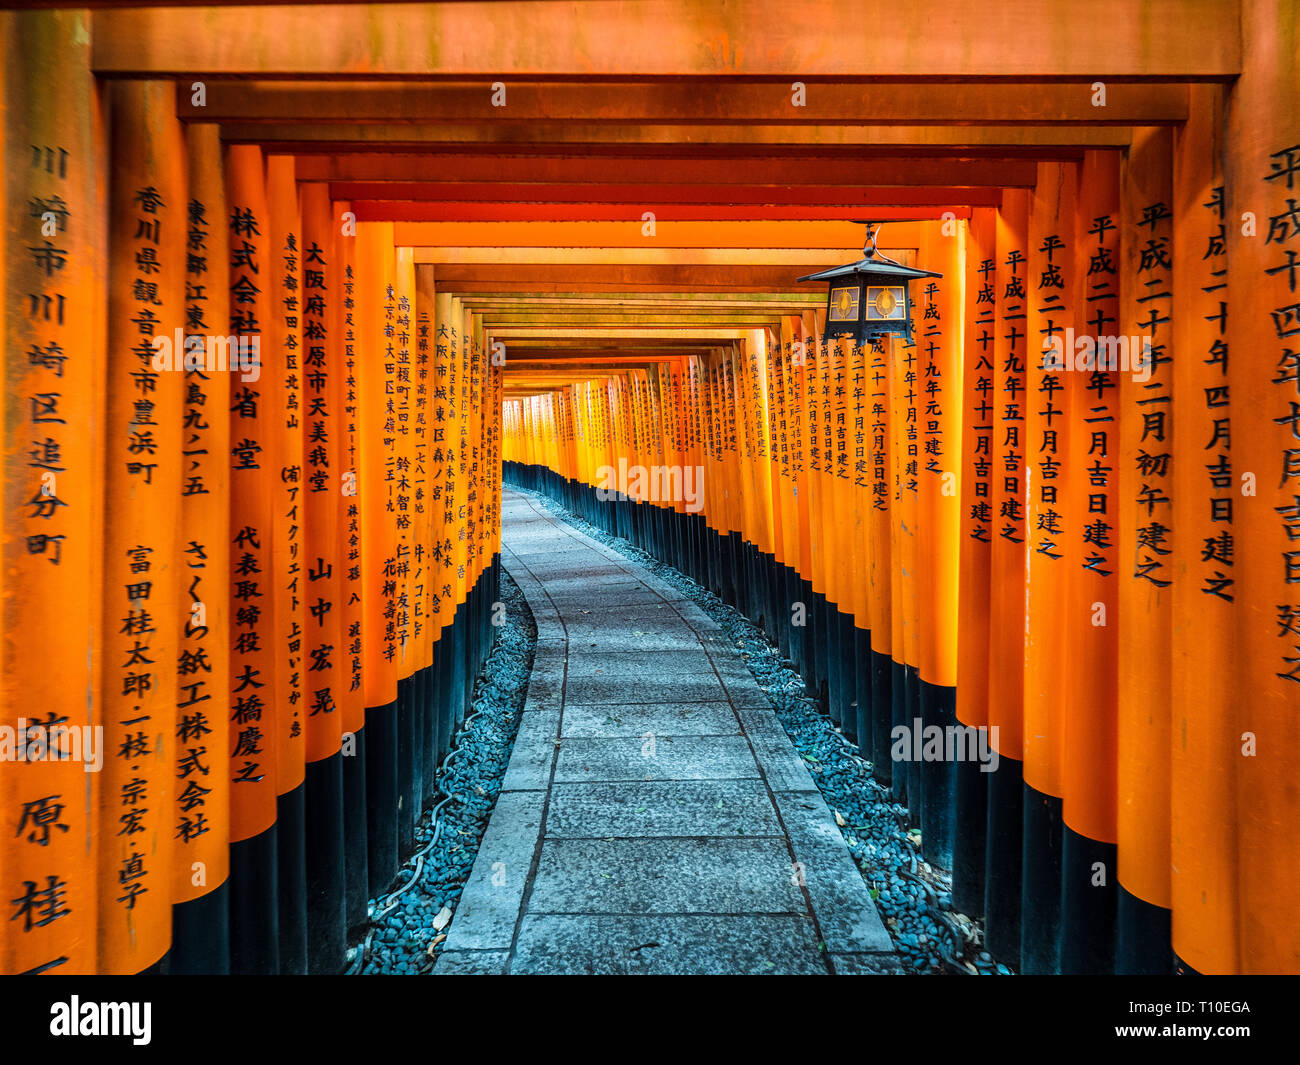 Torii - Vermillion Torii gates at the Fushimi Inari Shrine in Kyoto Japan. Famous Shinto Shrine, known for Torii gates winding up the forested hills. Stock Photo